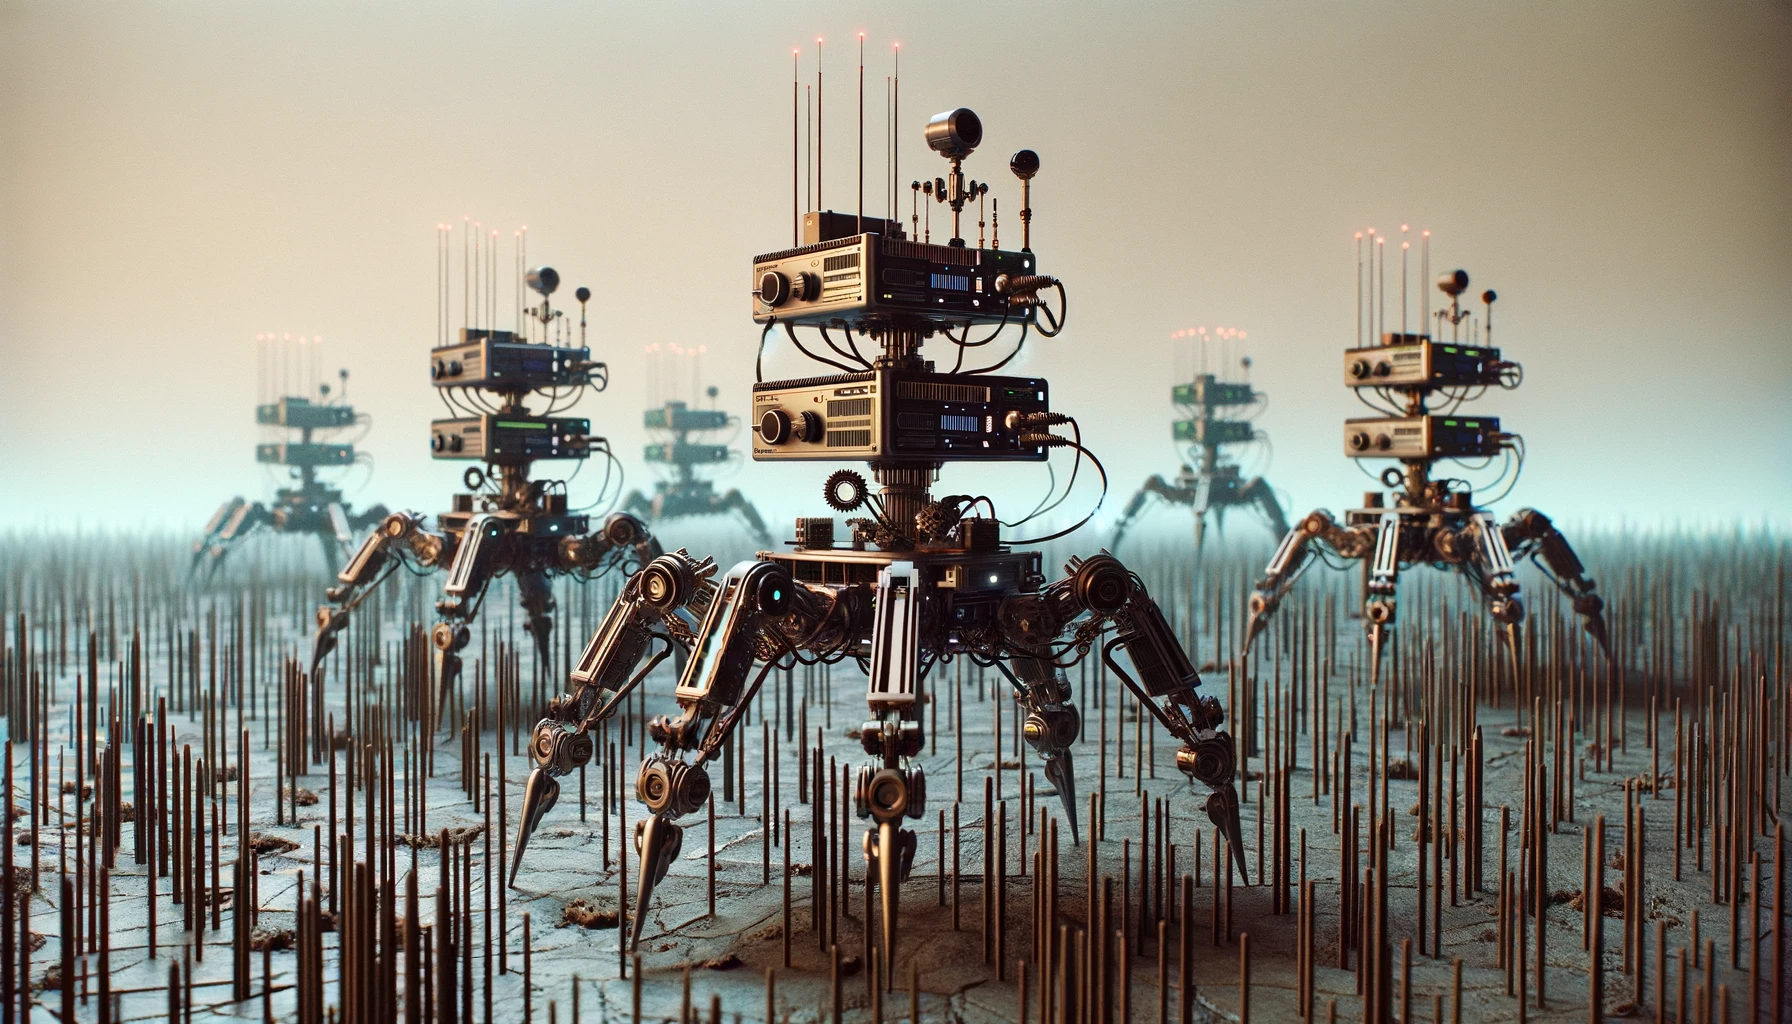 A grid of electromechanical spider-like robots on a concrete surface, with small cracks and many rounded-headed copper spires like tallgrass. It might be called poetically &#039;a cybernetic meadow'. Realistic sci-fi illustration.